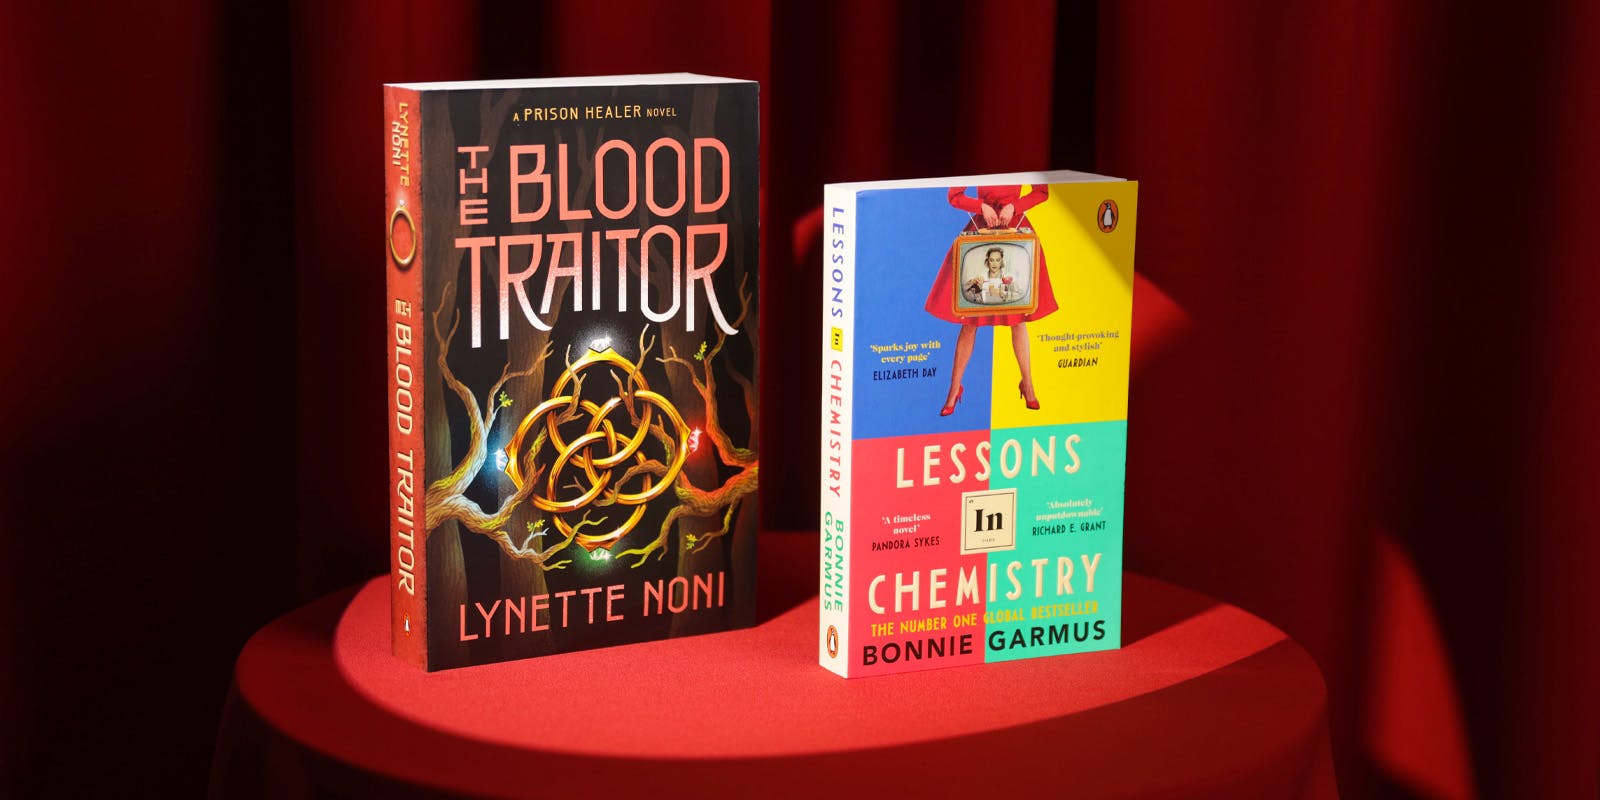 The Blood Traitor by Lynette Noni – News & Community